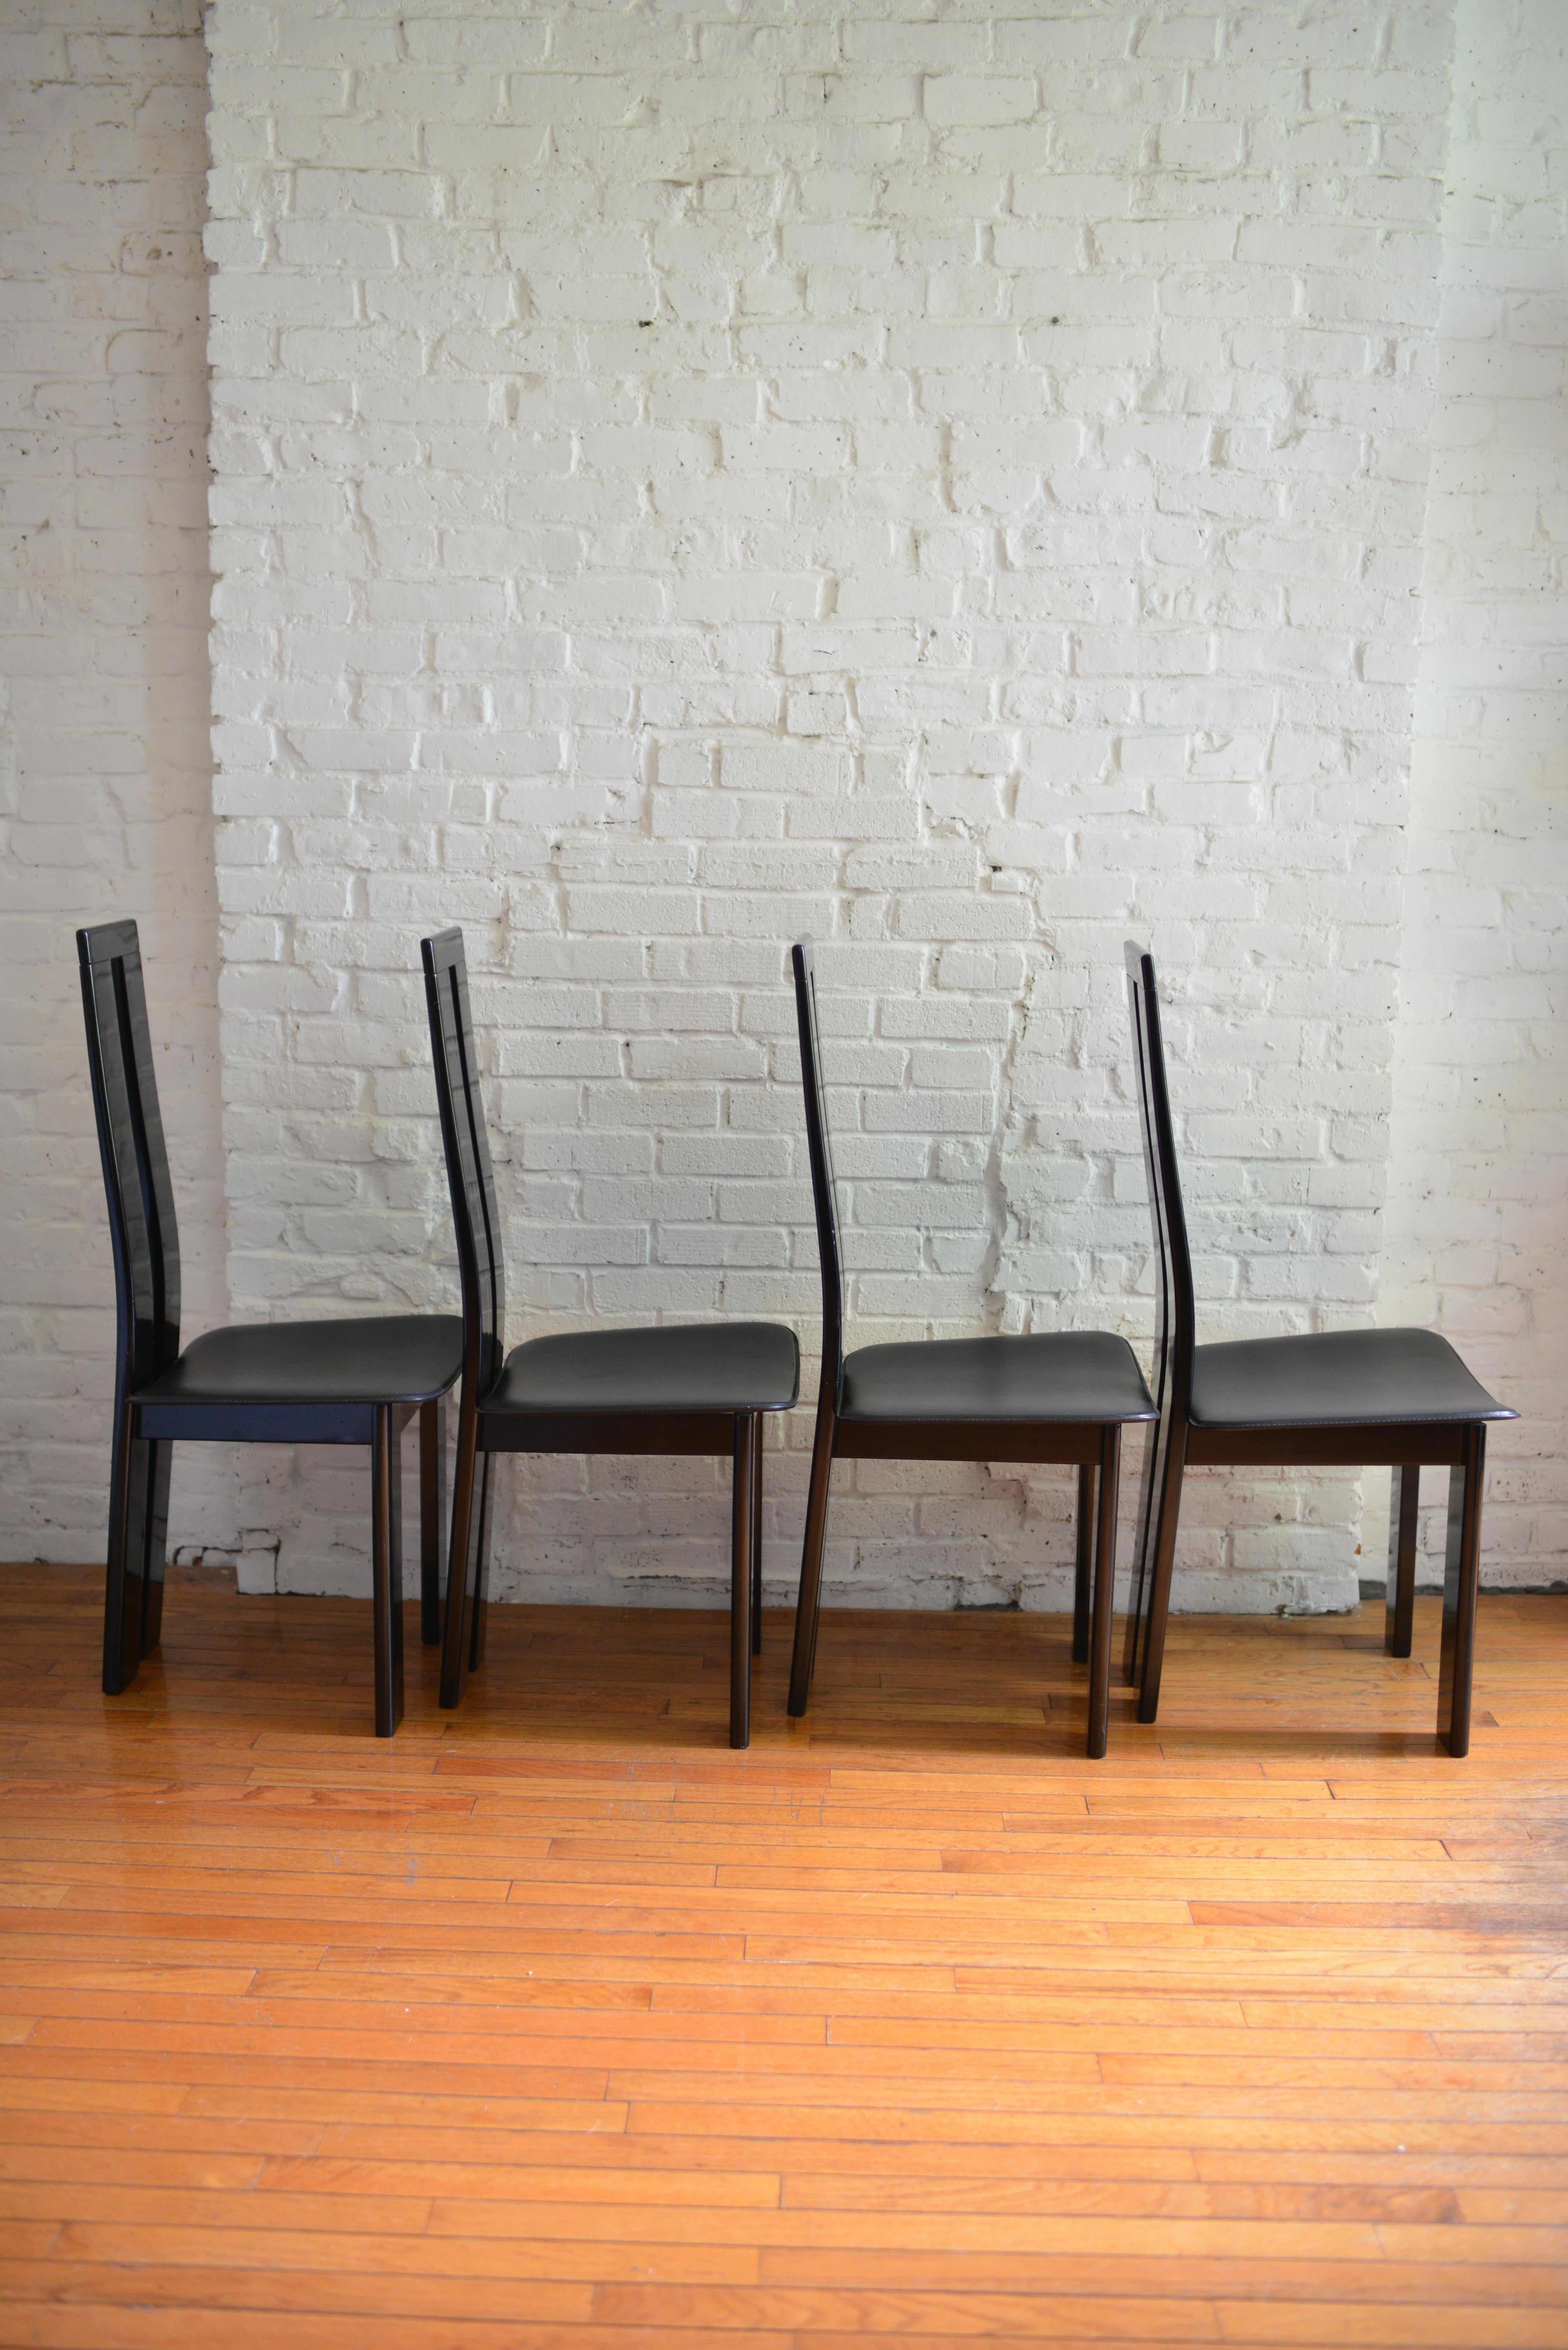 Post-Modern Set of 4 Pietro Costantini Post Modern Dining Chairs, Made in Italy, 1970s For Sale